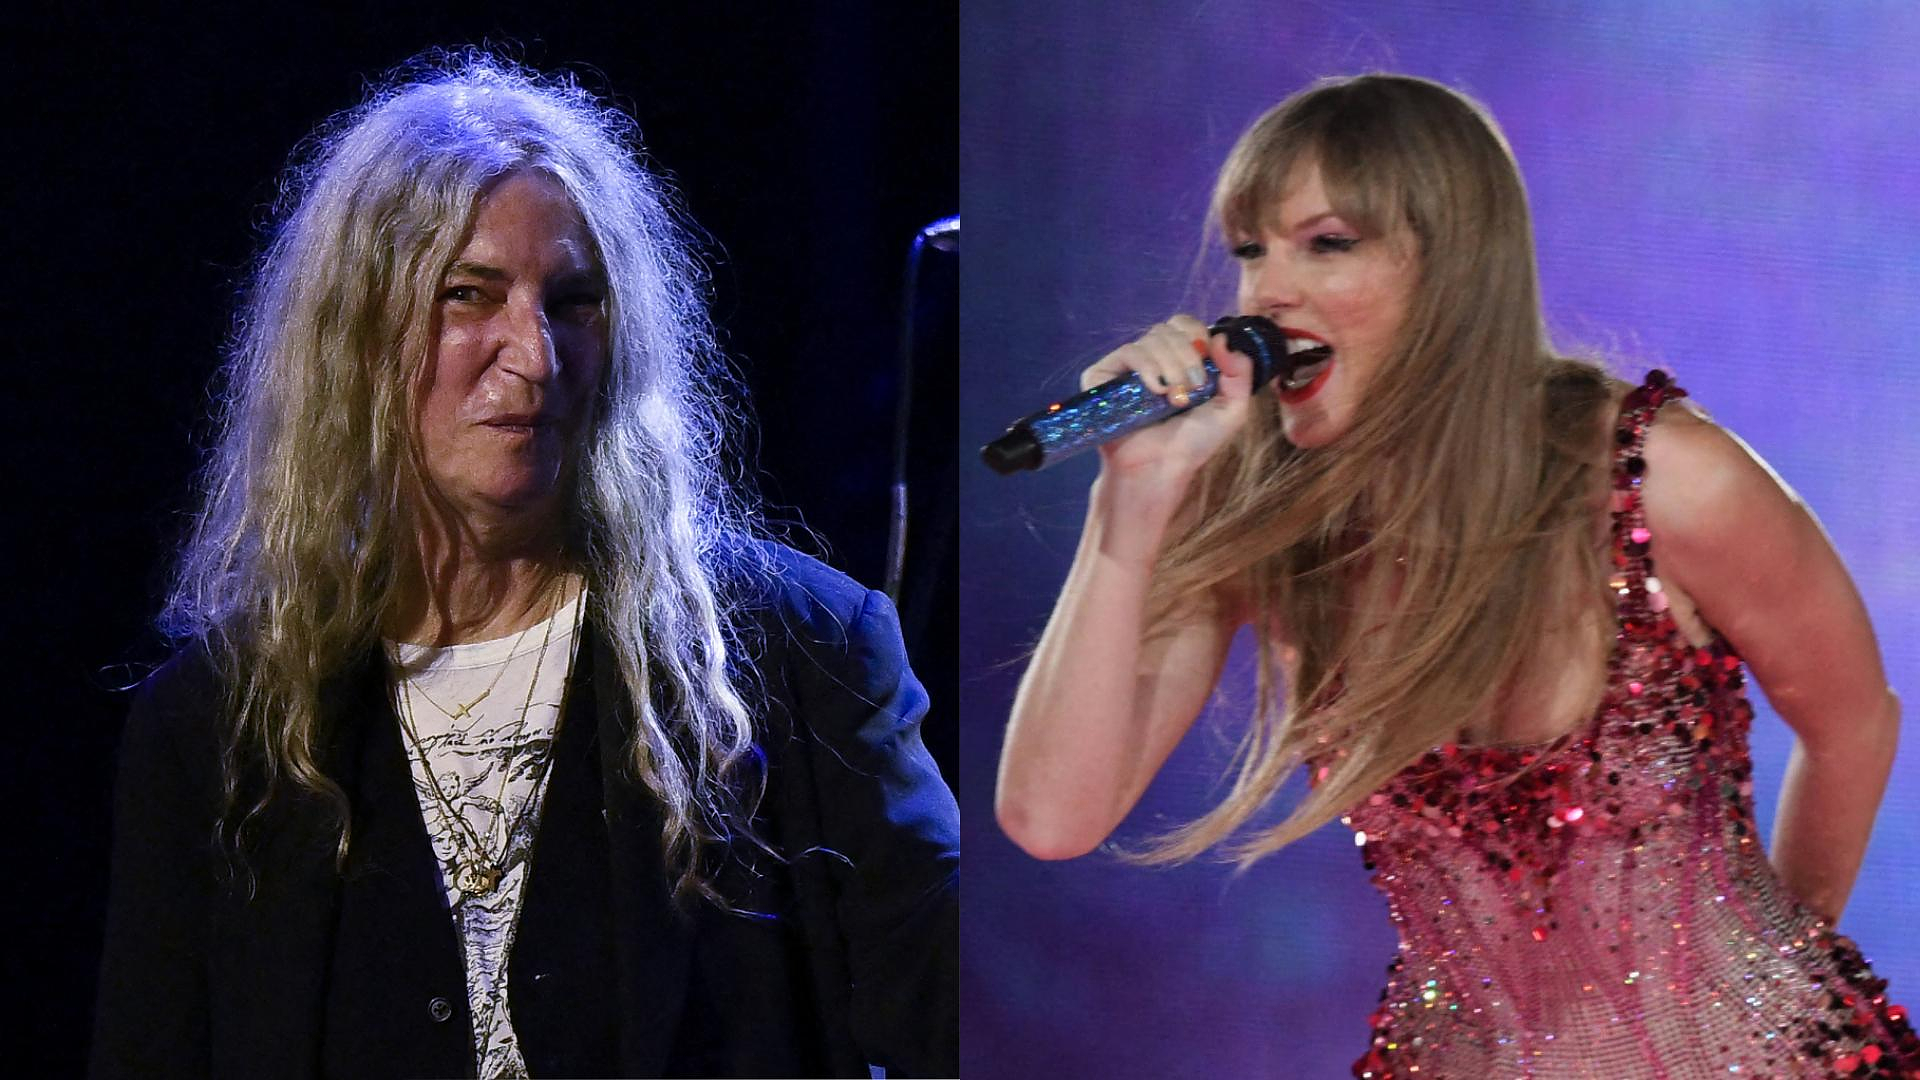 Patti Smith “moved” to be mentioned in Taylor Swift’s new album